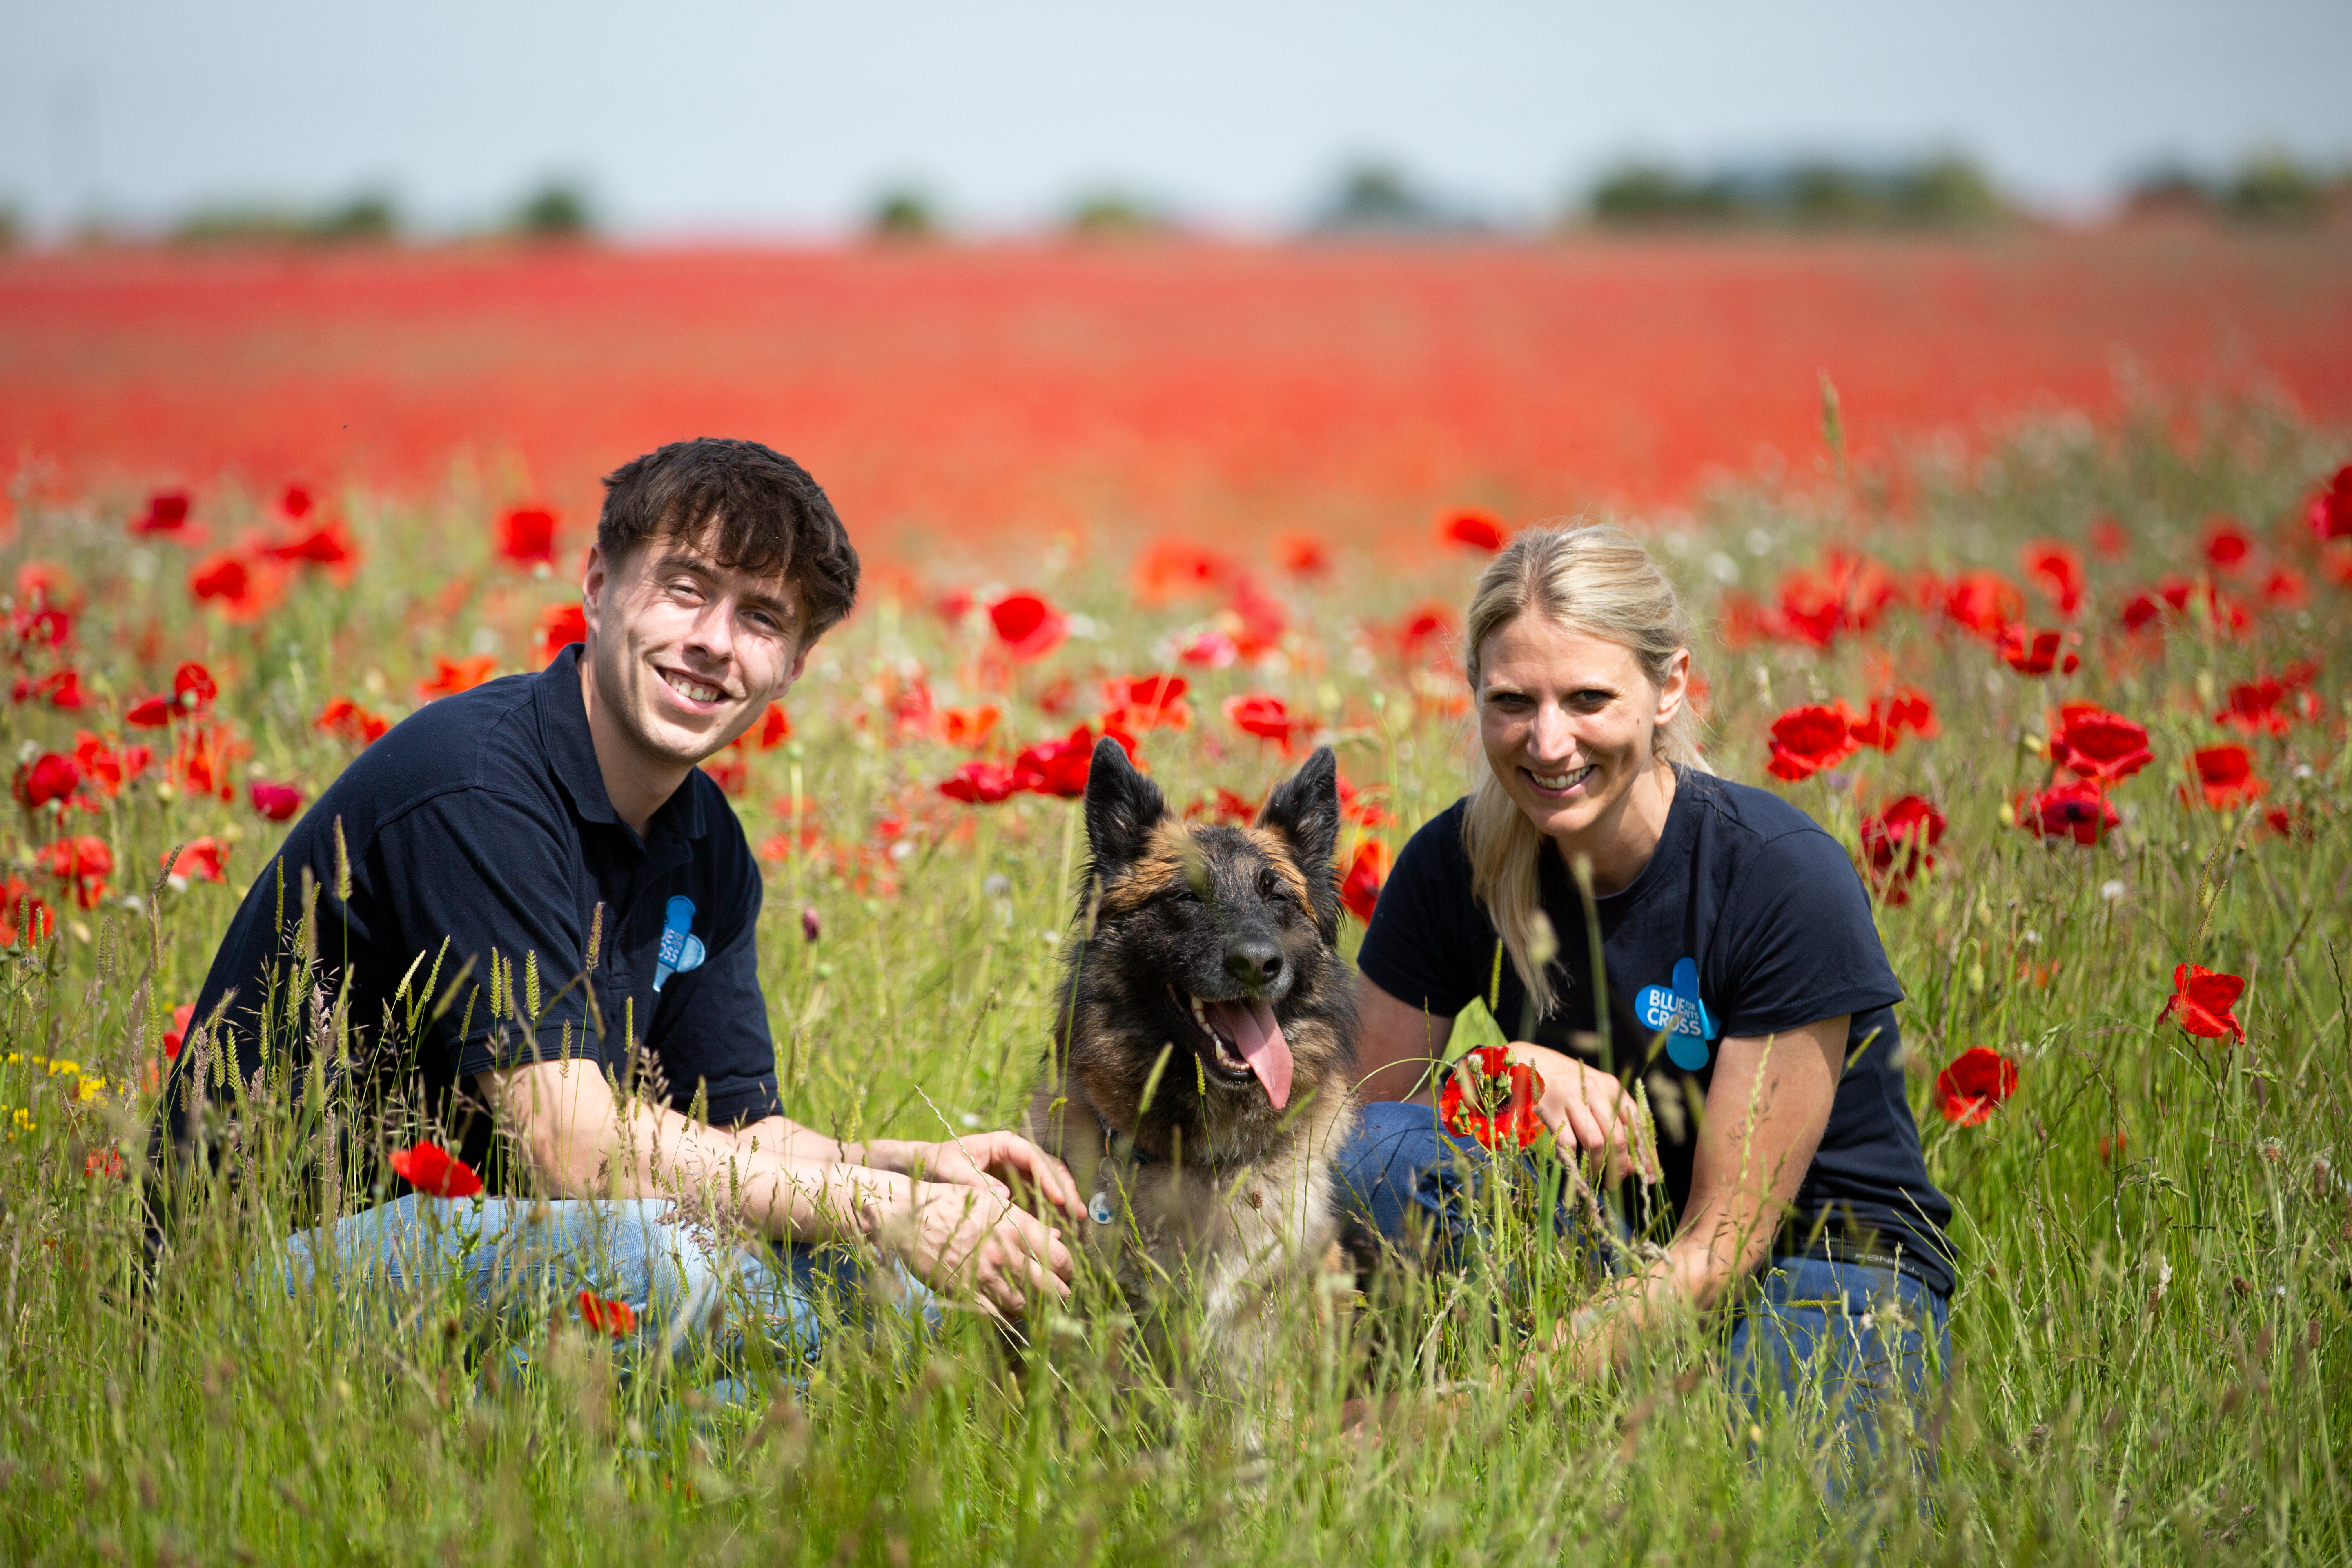 Blue Cross trainer Thomas Rainbow and Blue Cross behaviourist Becky Skyrme crouch down next to a German shepherd dog in a field of red poppies